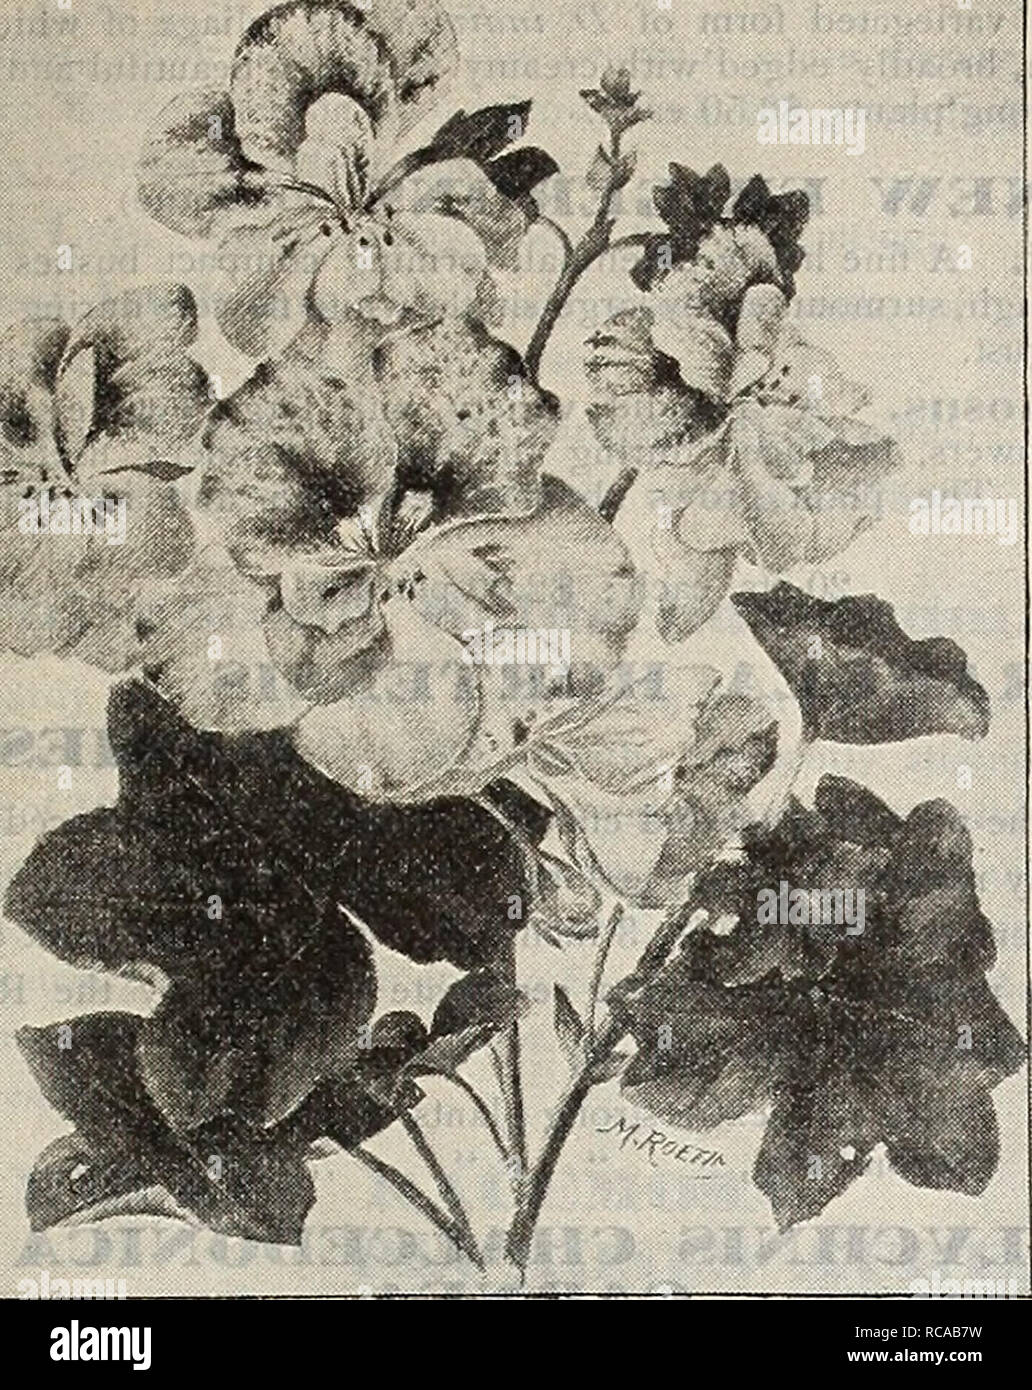 . Dreer's 1901 garden calendar. Seeds Catalogs; Nursery stock Catalogs; Gardening Equipment and supplies Catalogs; Flowers Seeds Catalogs; Vegetables Seeds Catalogs; Fruit Seeds Catalogs. HENRYADREER-PnilADElPHIAfA- NEW'&quot;°RARE PIAMT5- Dtfl &quot; /S»r^ ^. The Bride each. Double IvYtLkaved Geranium Leopard. , Double pure white ; creeping habit. 25 cts. TWO VAI.UABI.E NEW^ FERNS. Adiantlini Charlottse. Our illustration on page 16 gives a faint idea of the beauty and grace of this new Maidenhair; it is en- tirely distinct from all other varieties, and even more graceful than A. gracillimitm, Stock Photo